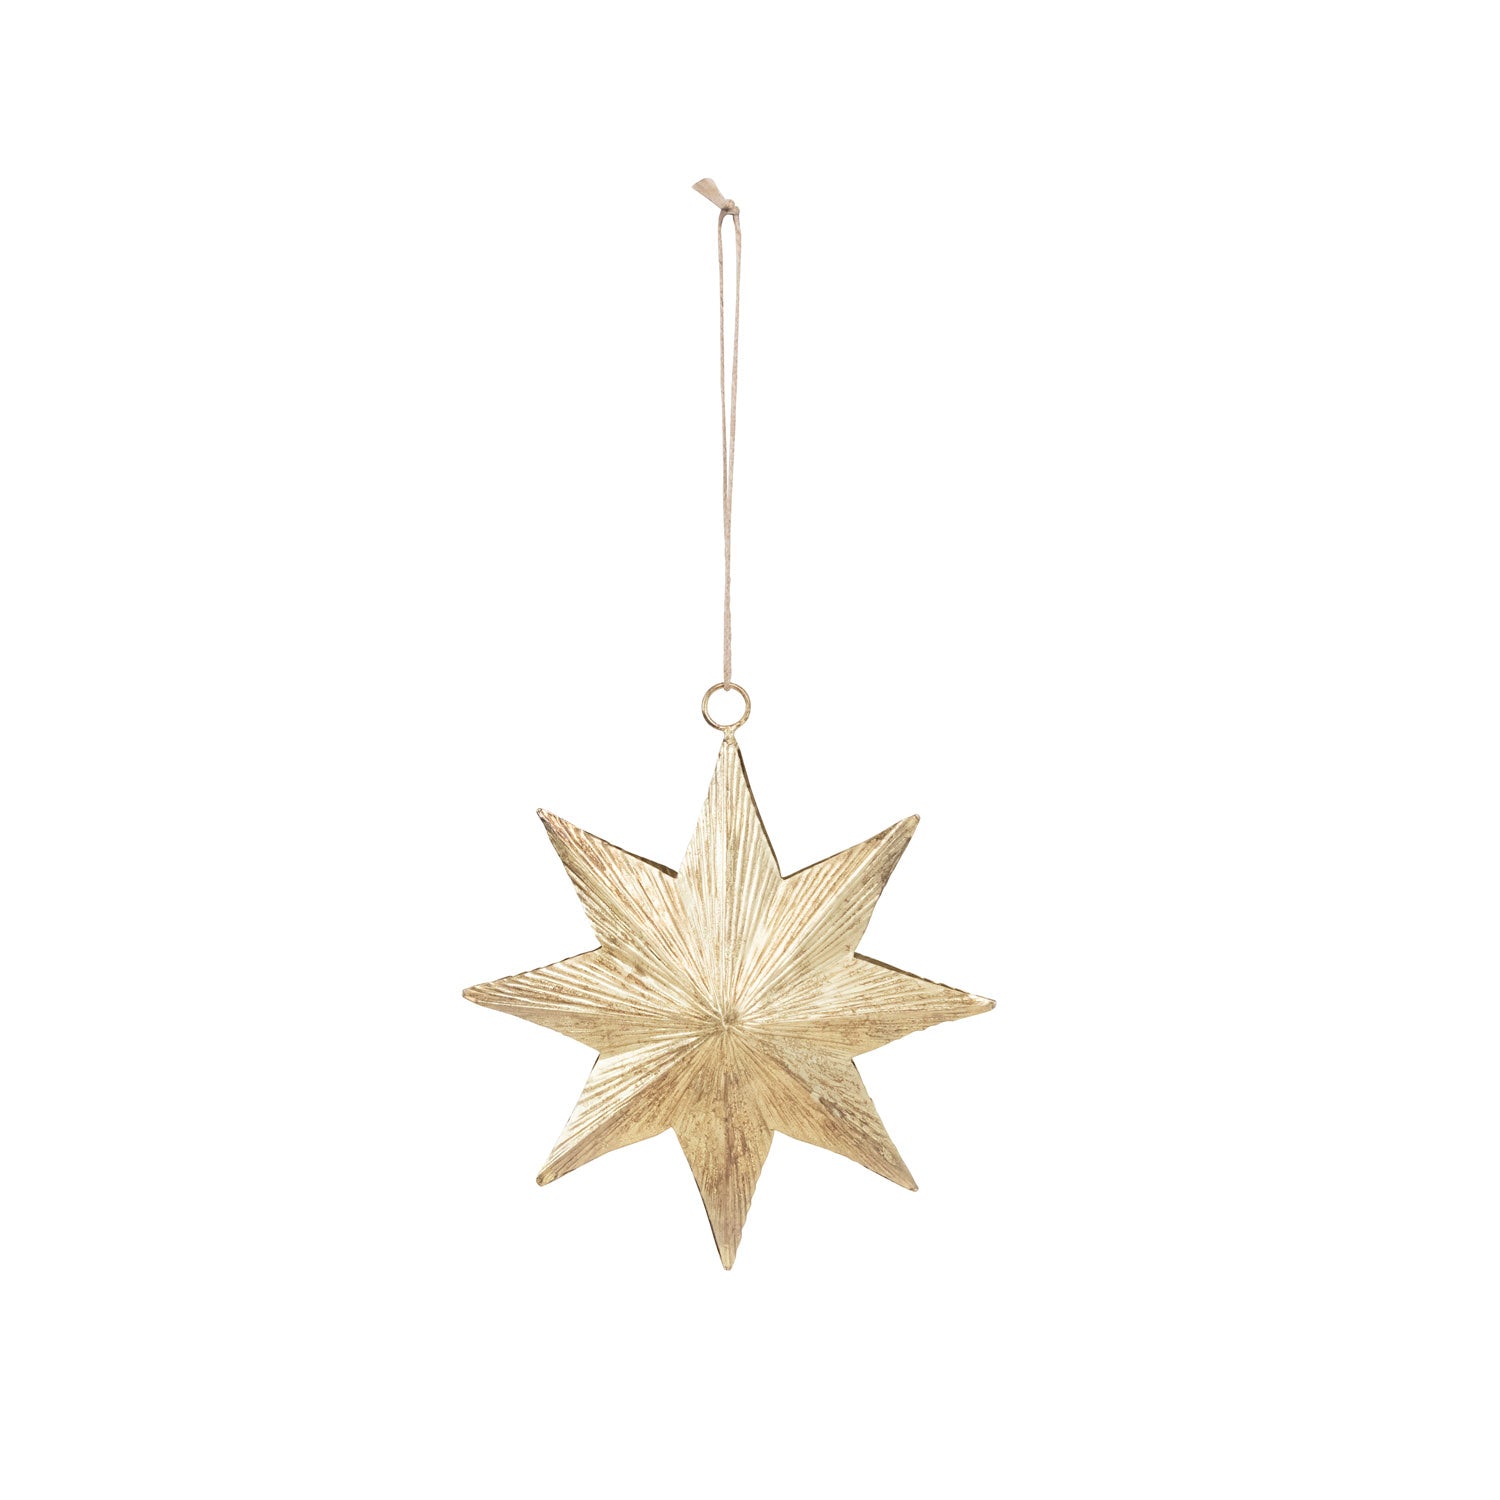 embossed metal two-sided star ornament, antique brass finish